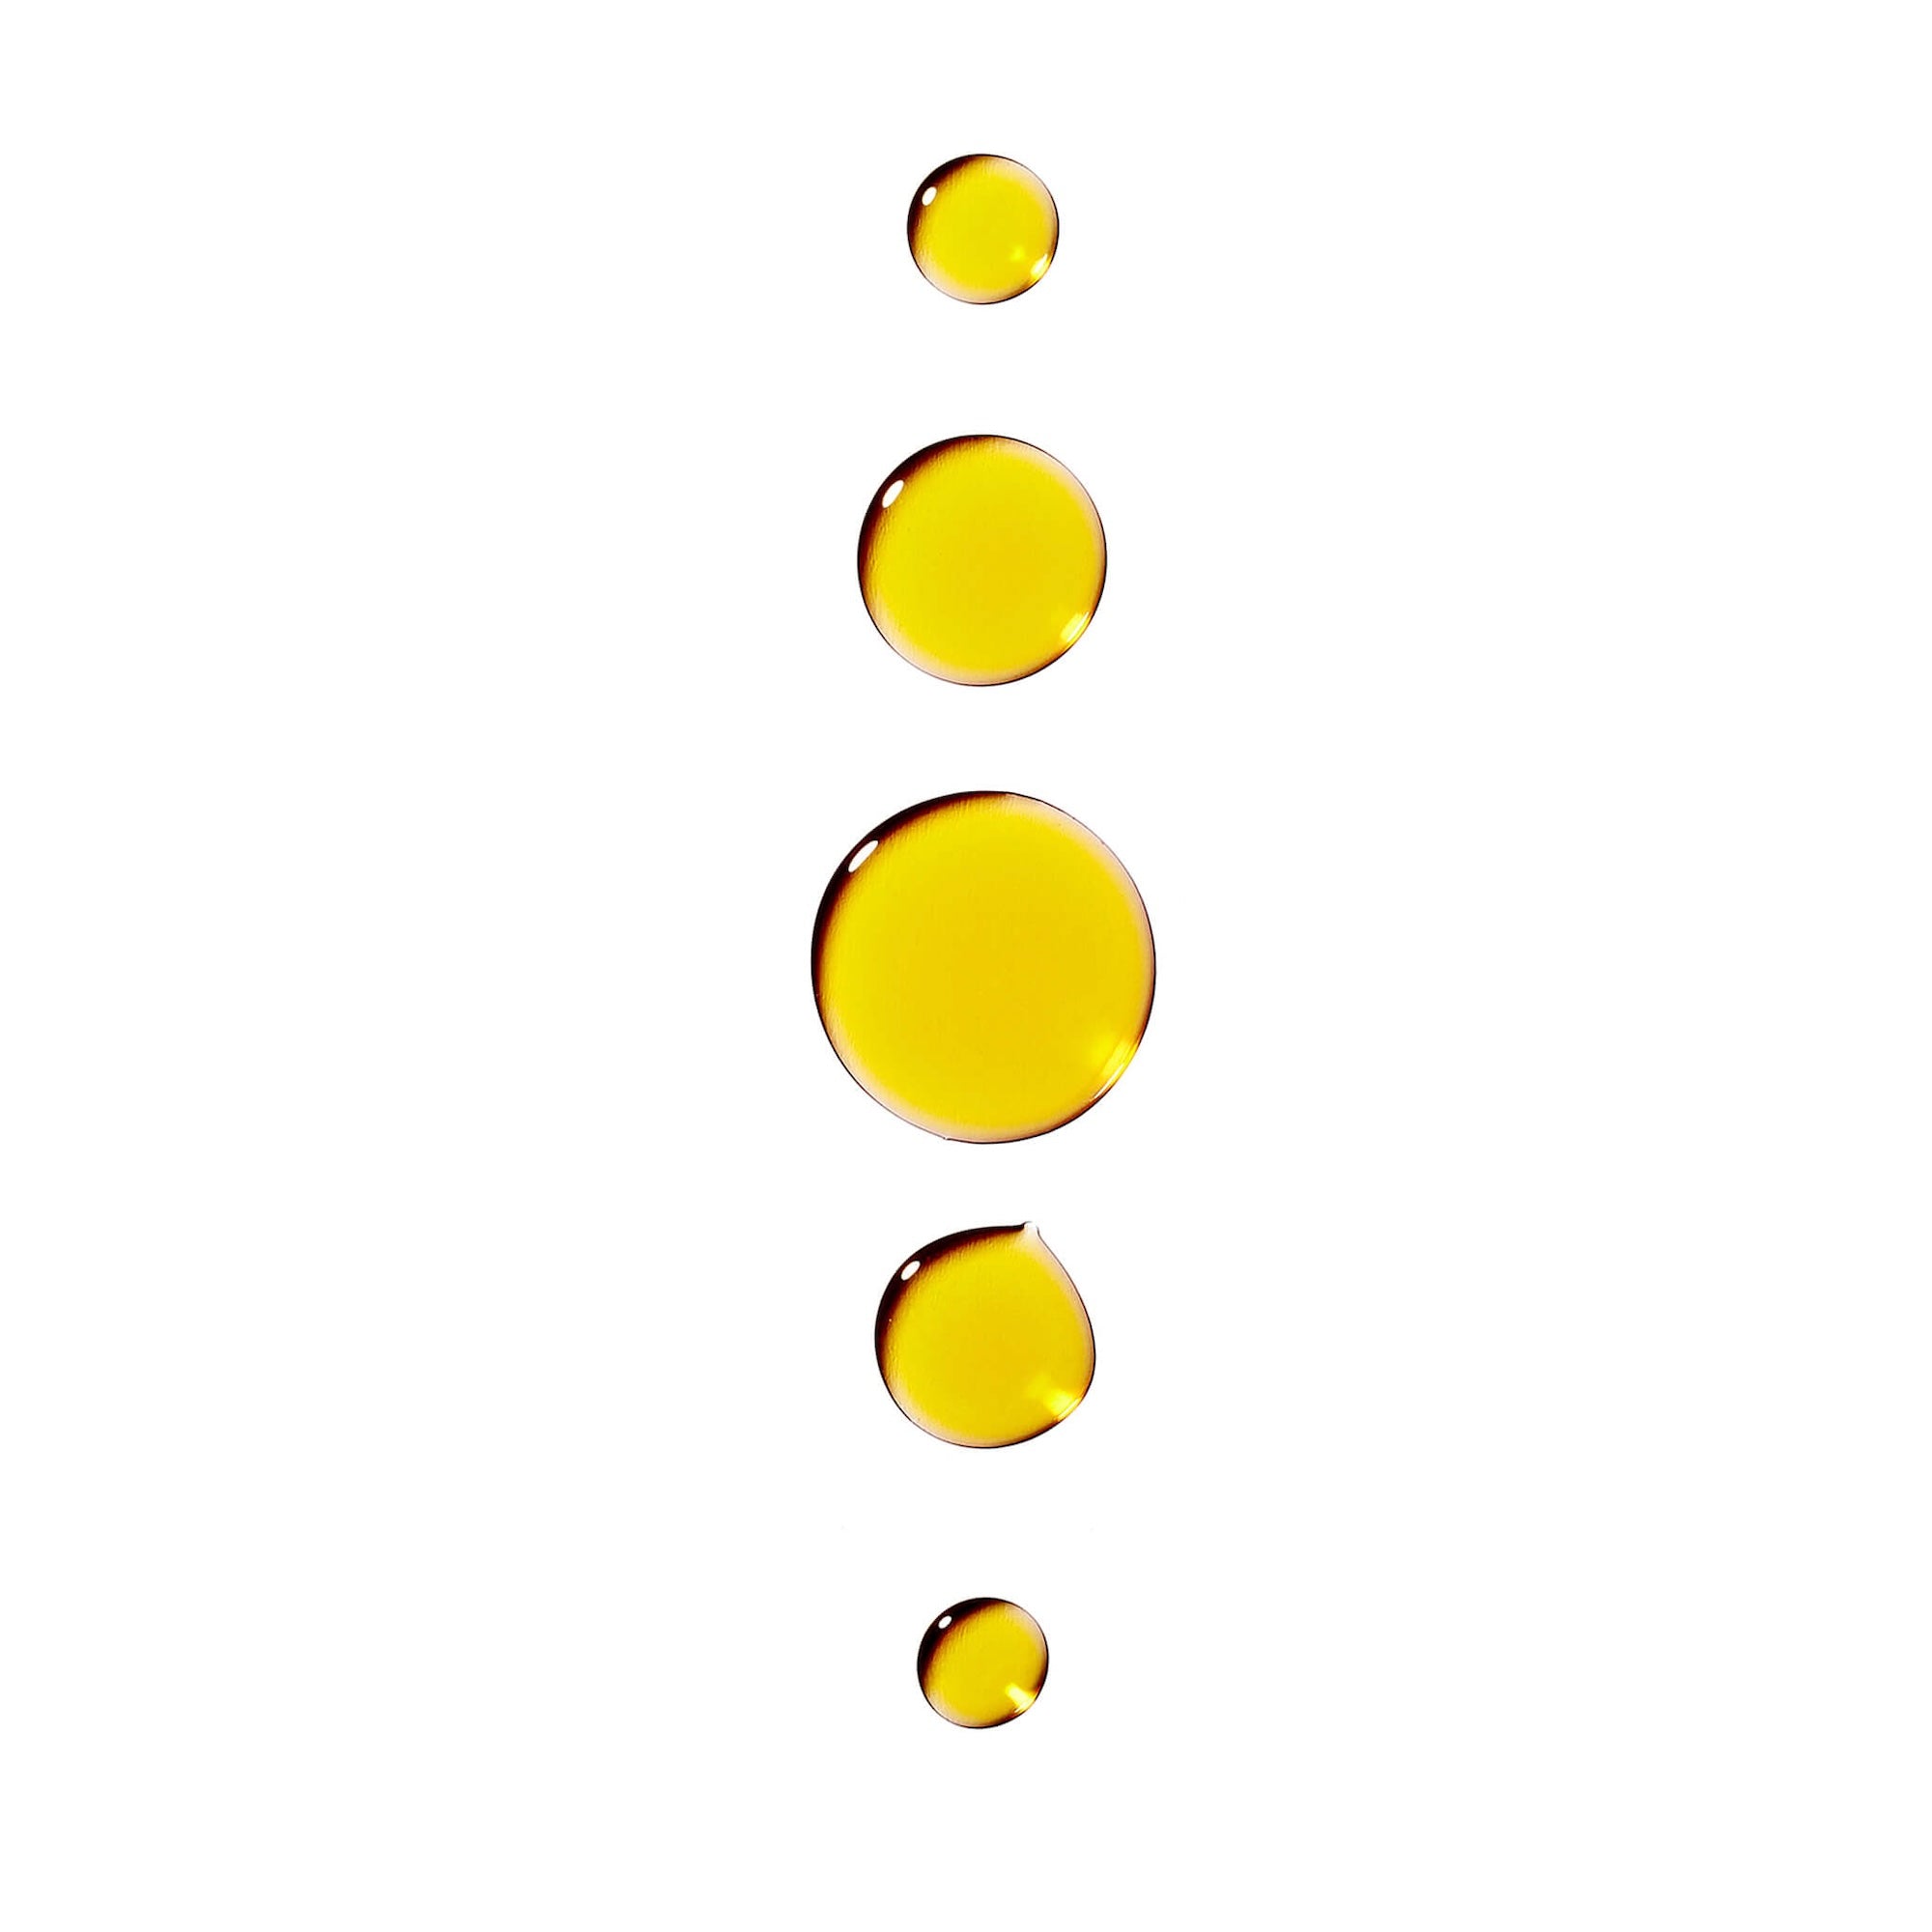 Image of drops of the Bia Nourishing Facial Oil on a white background.